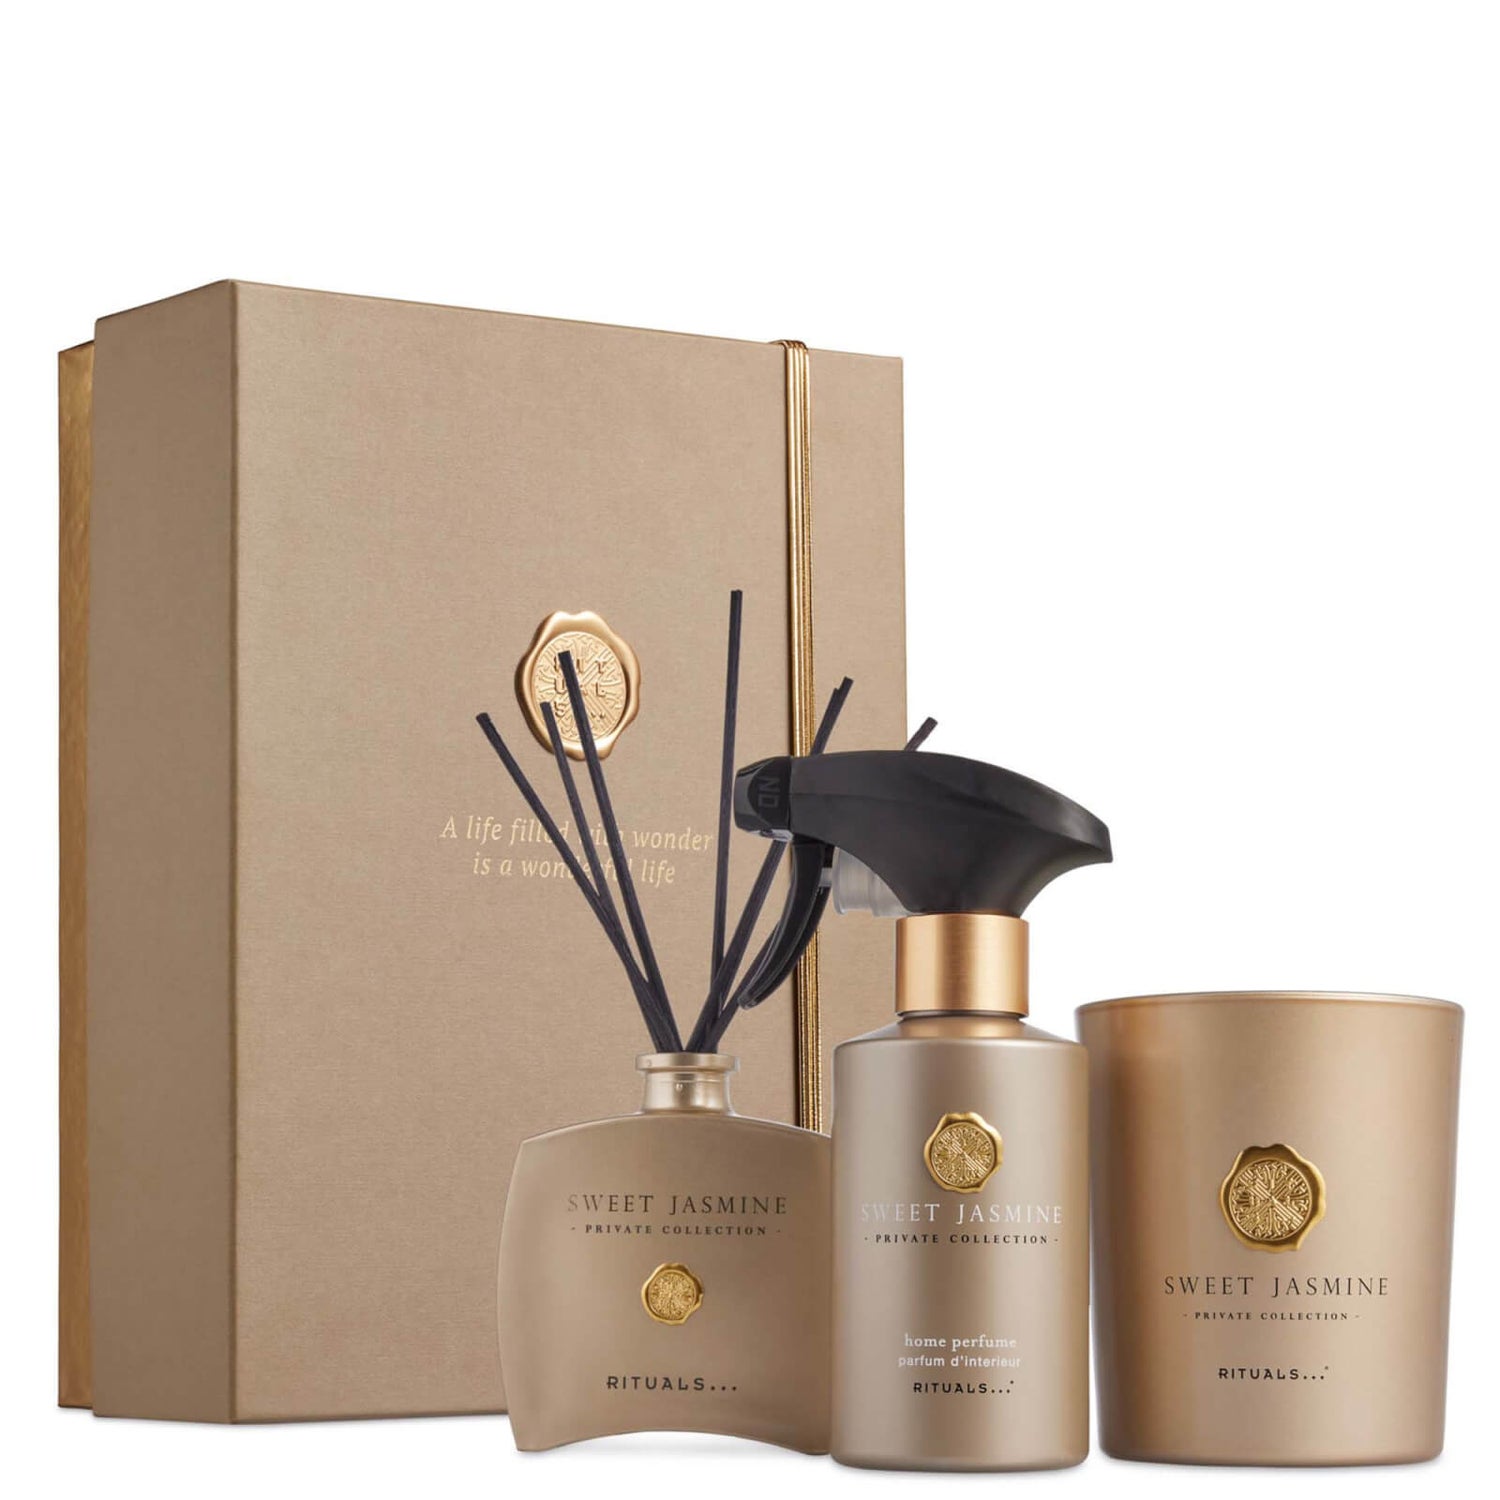 Rituals Private Collection Savage Garden Fresh Home Gift Set